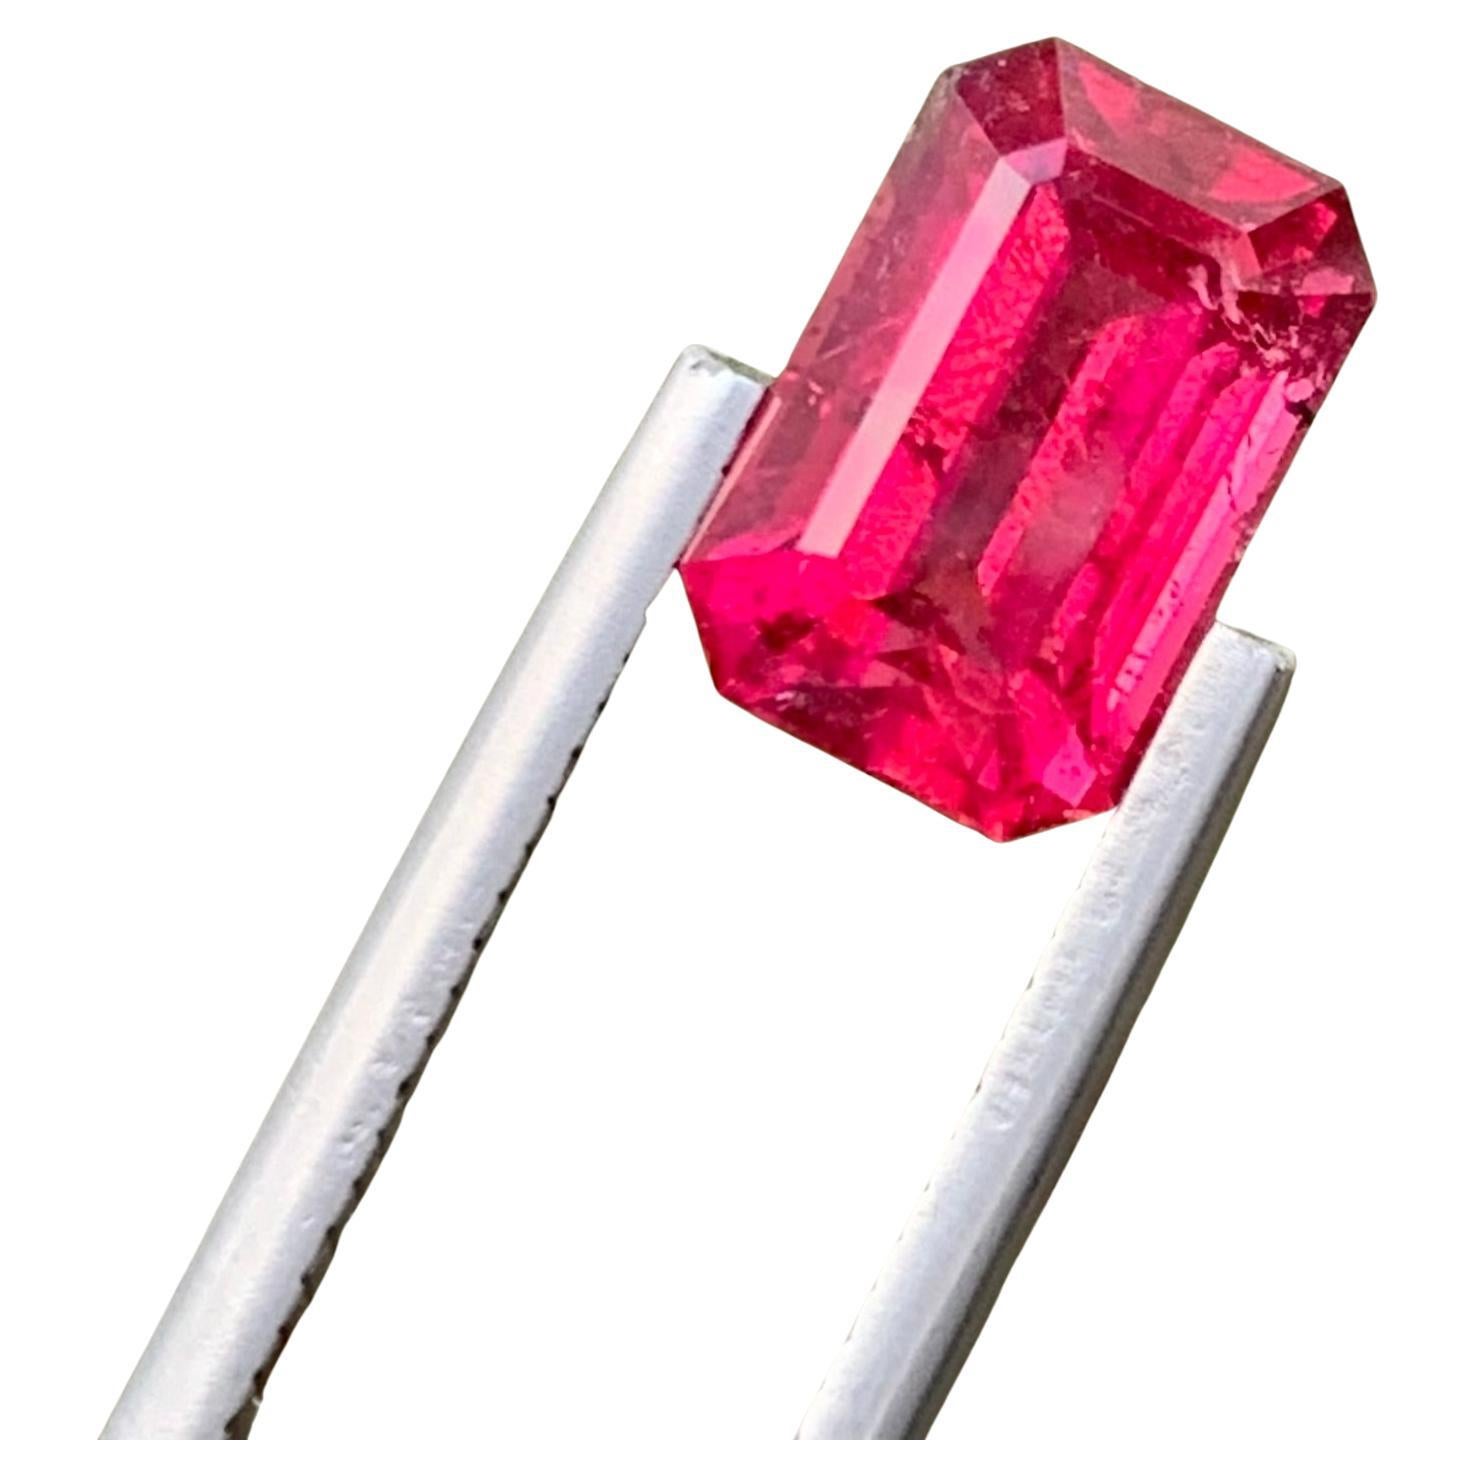 3.20 Carats Faceted Natural Rubellite Tourmaline Gemstone Emerald Shape For Sale